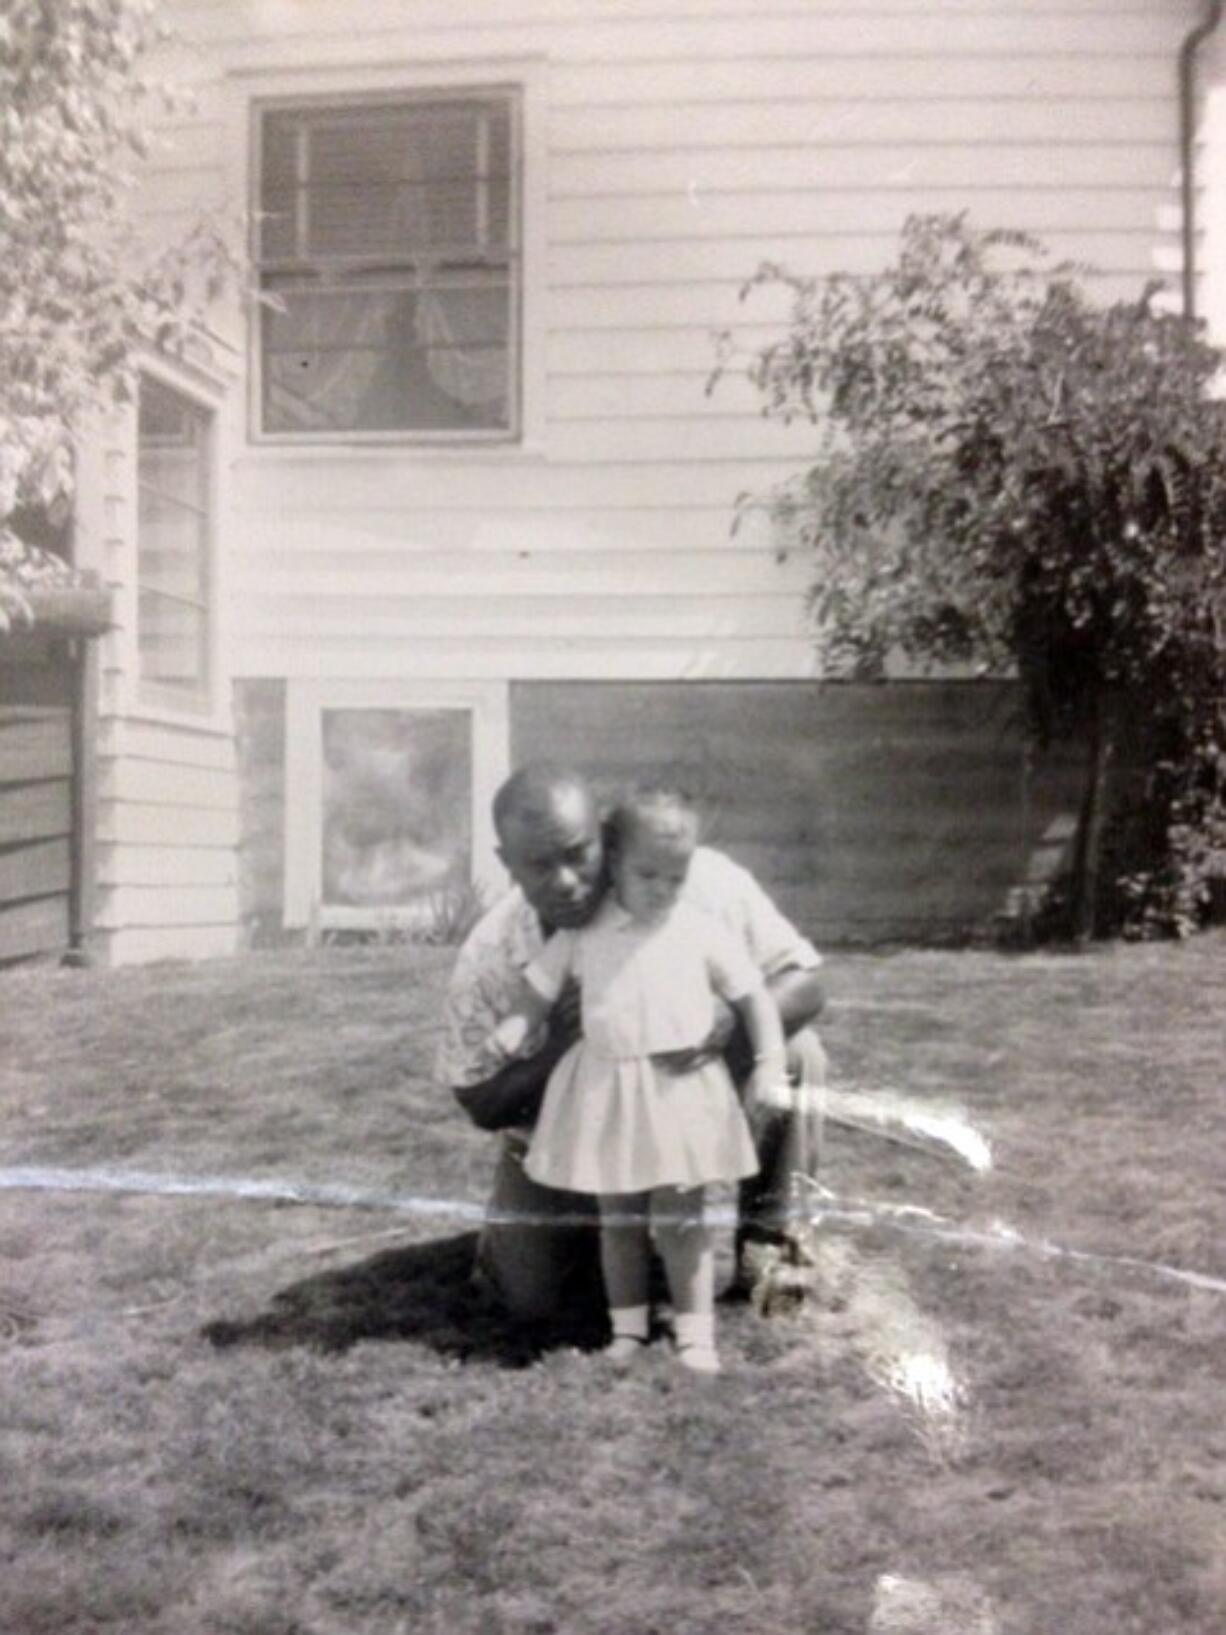 Marie Bruin kept this childhood photo of herself and her adoptive father on her desk at work.